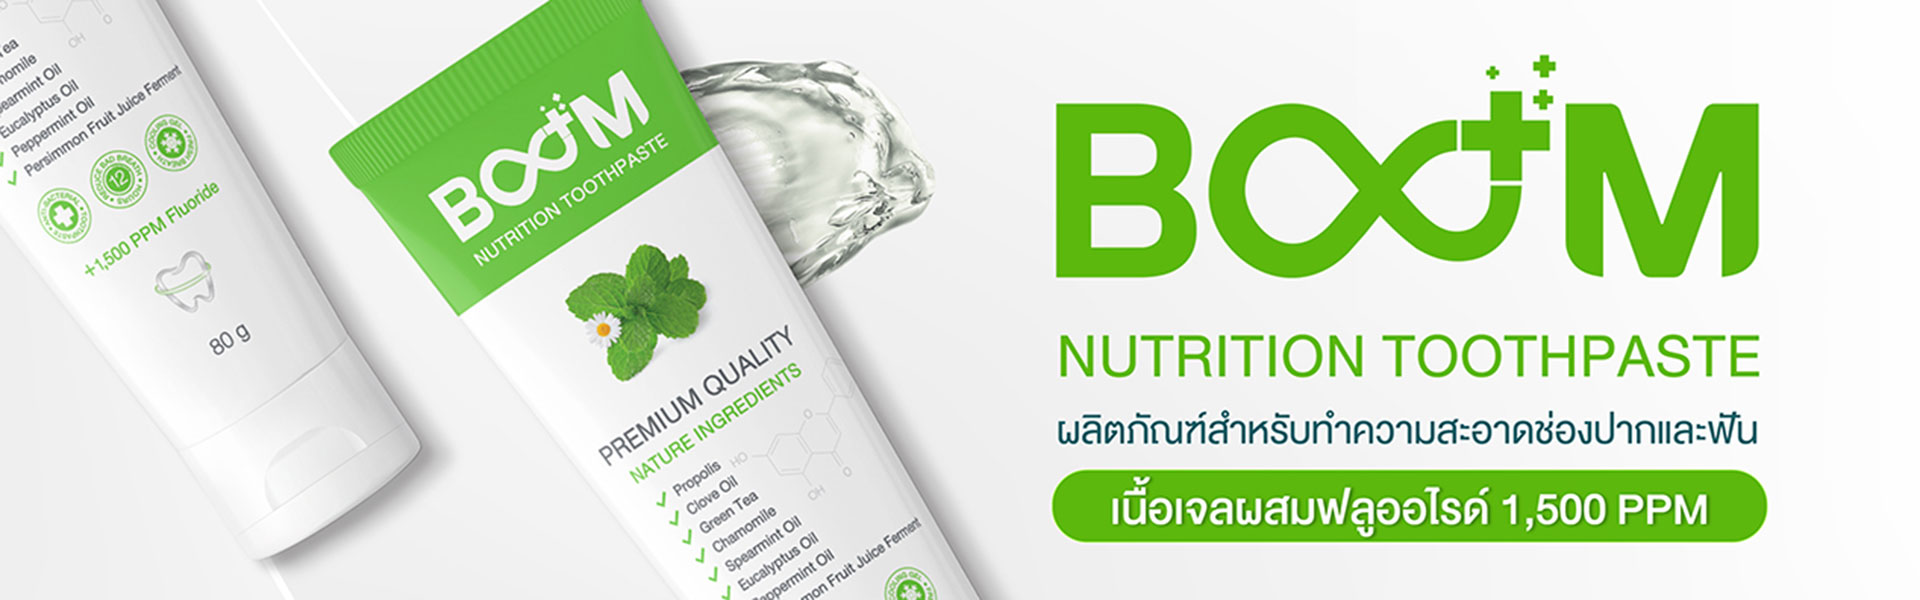 Product - Boom Nutrition Toothpaste